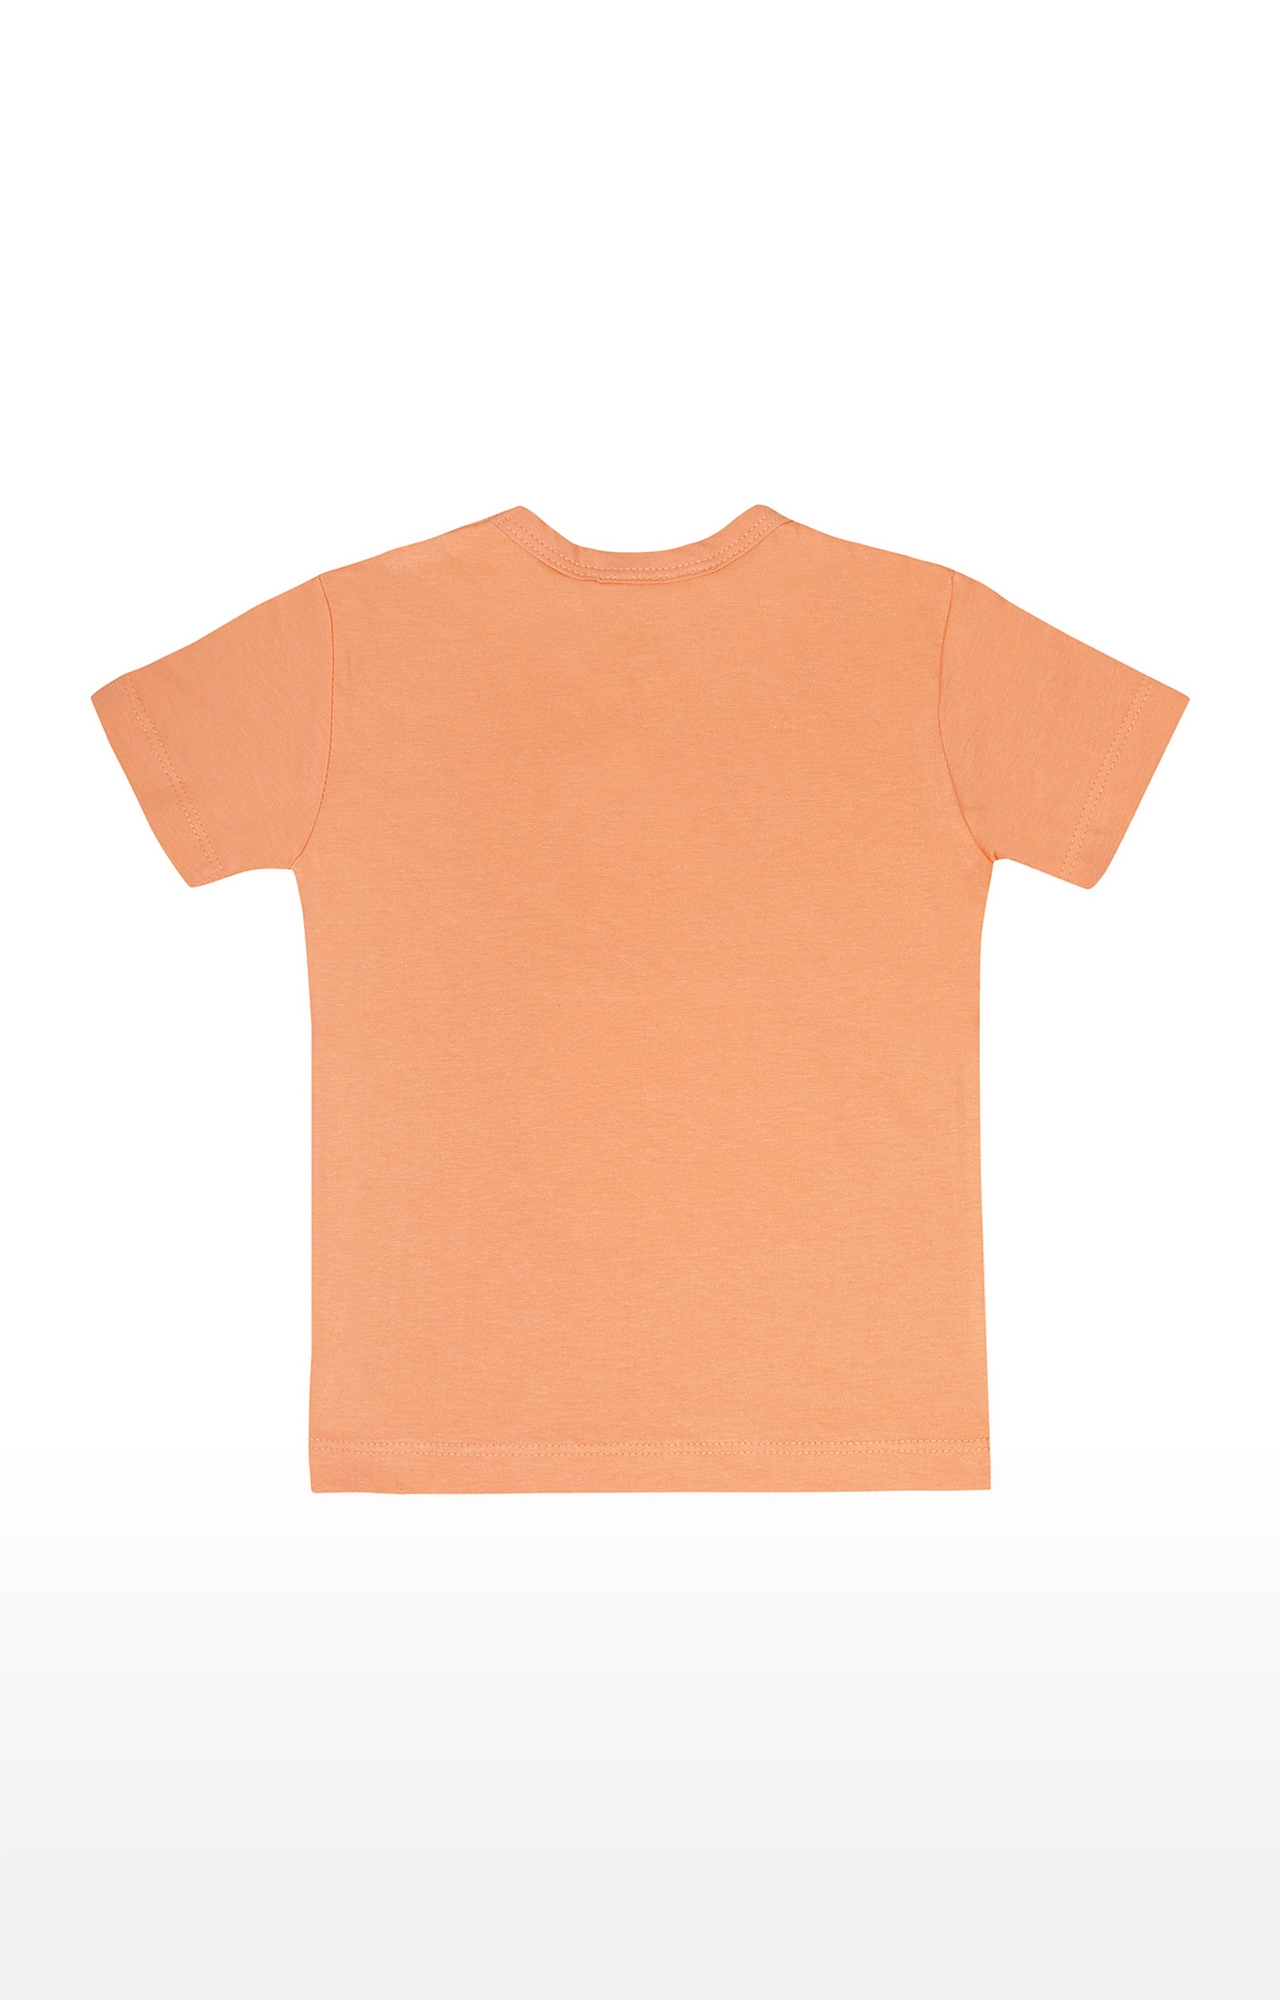 Popsicles Clothing | Popsicles Soft Cotton Comfort fit Round Neck Short Sleeves T-Shirt and Shorts Set for Boys - Orange (0-6M) 3